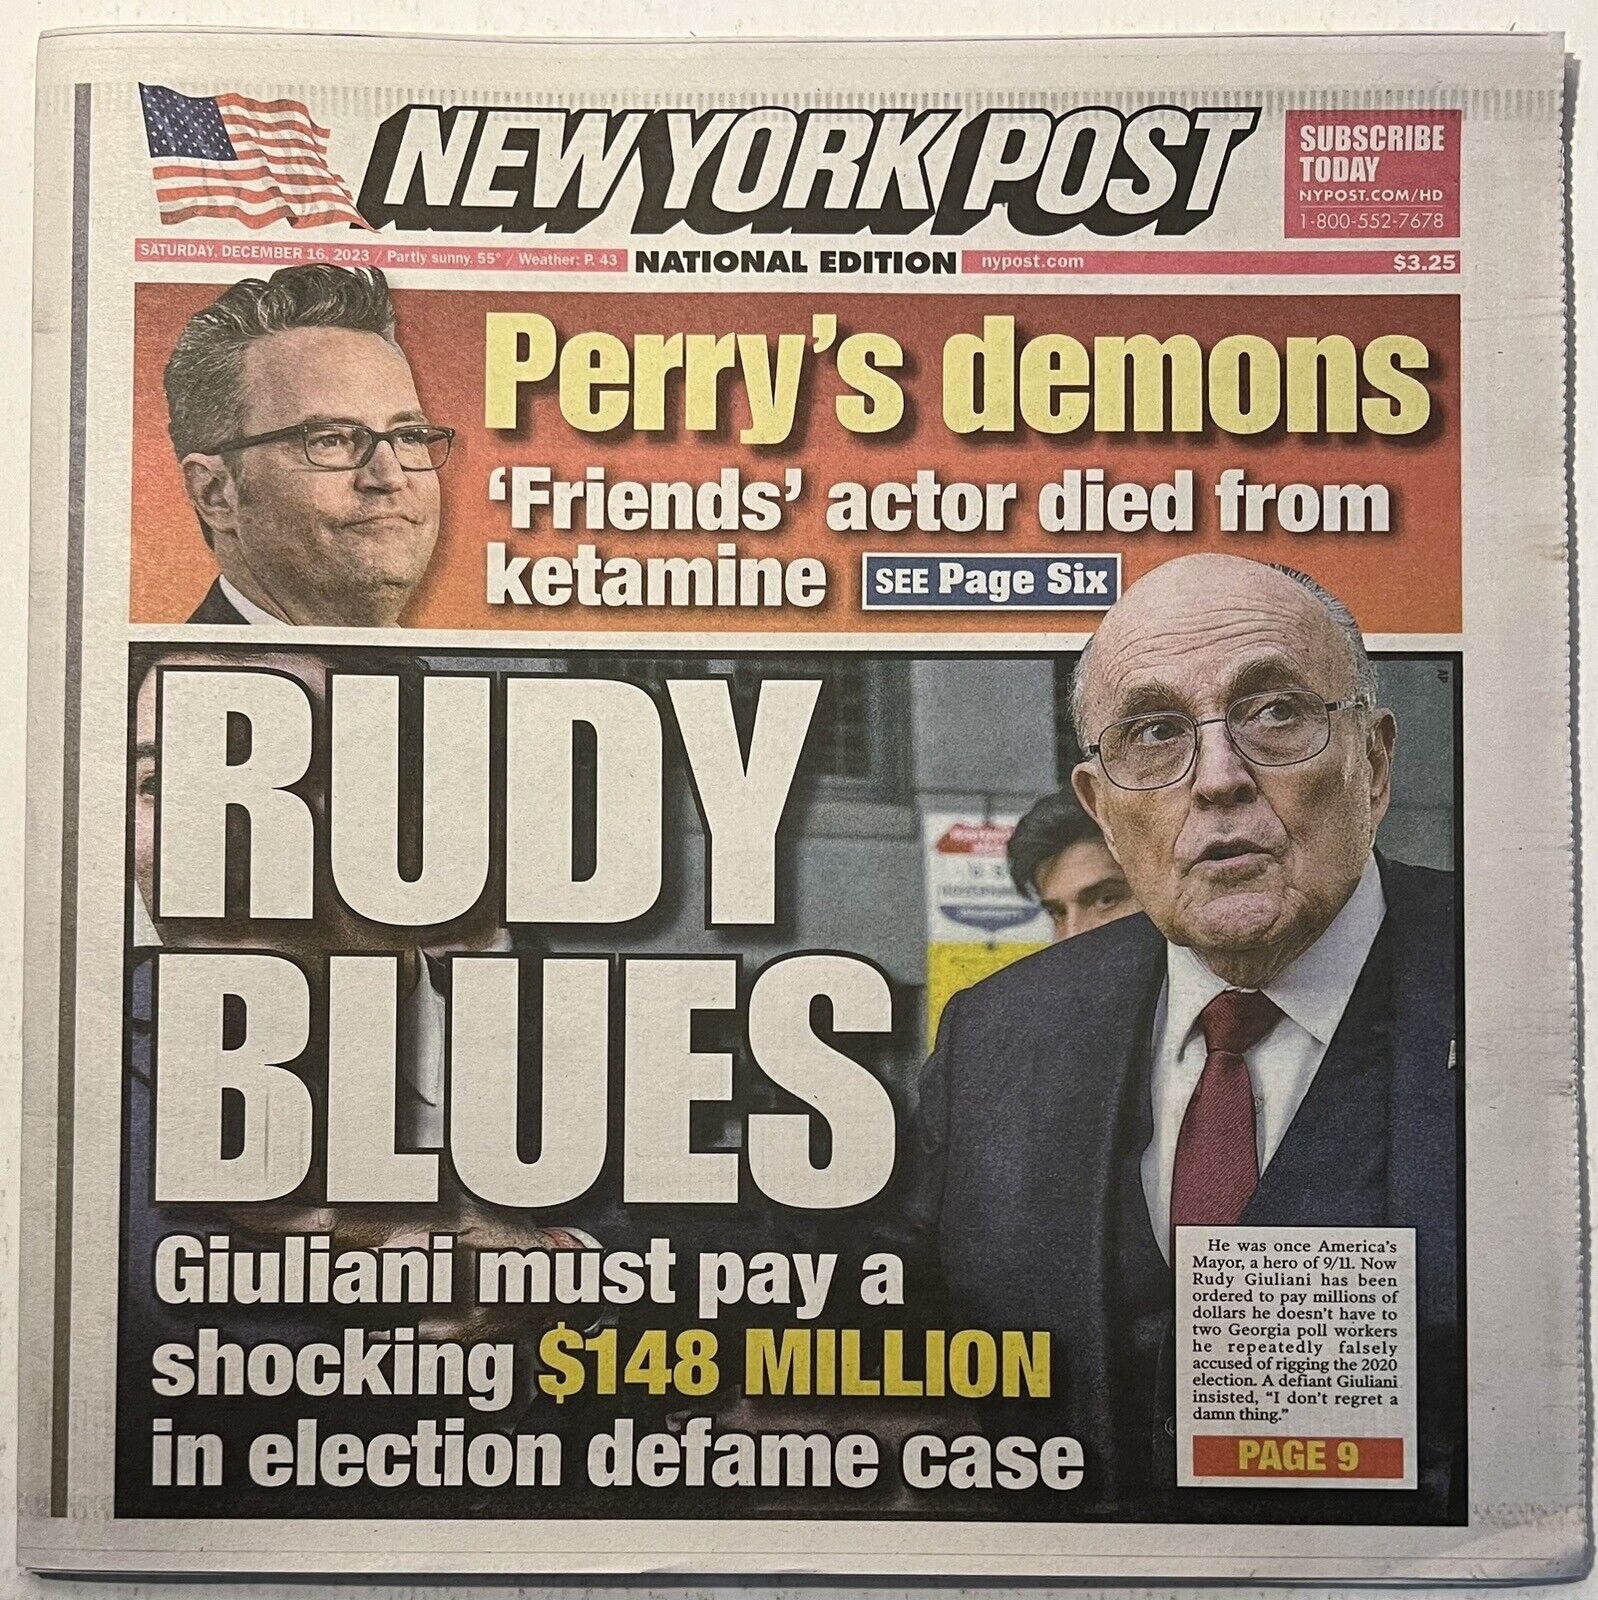 NEW YORK POST - 12/16/23 - FRONT:  RUDY BLUES - MATTHEW PERRY DEATH BY KETAMINE